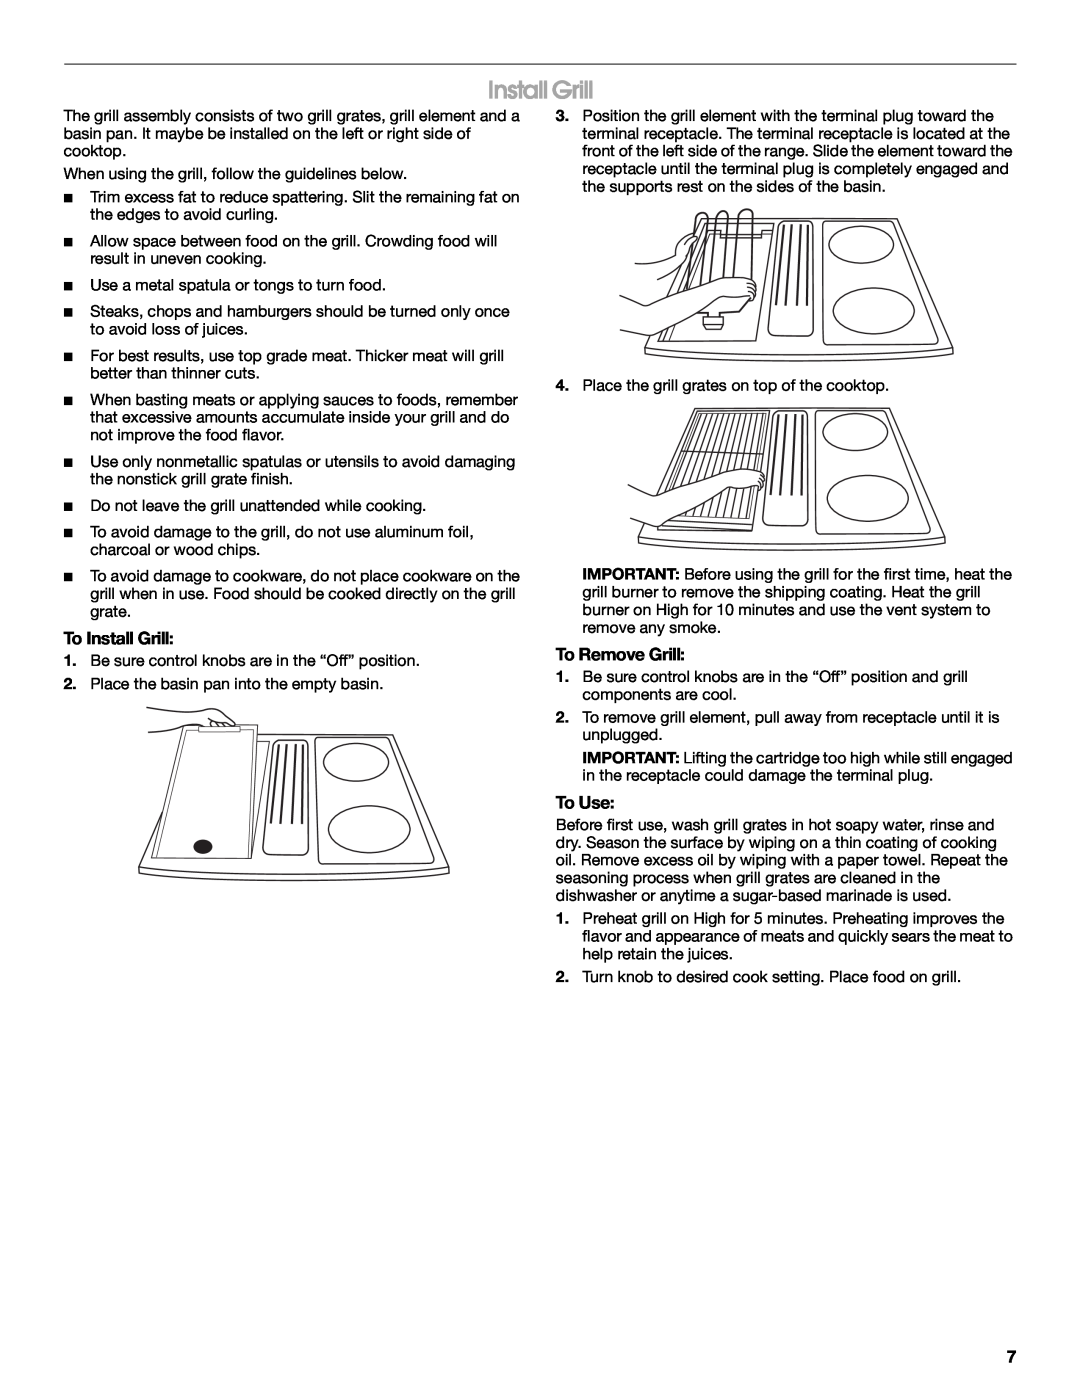 Jenn-Air JES9860, JES9750 manual To Install Grill, To Remove Grill, To Use 